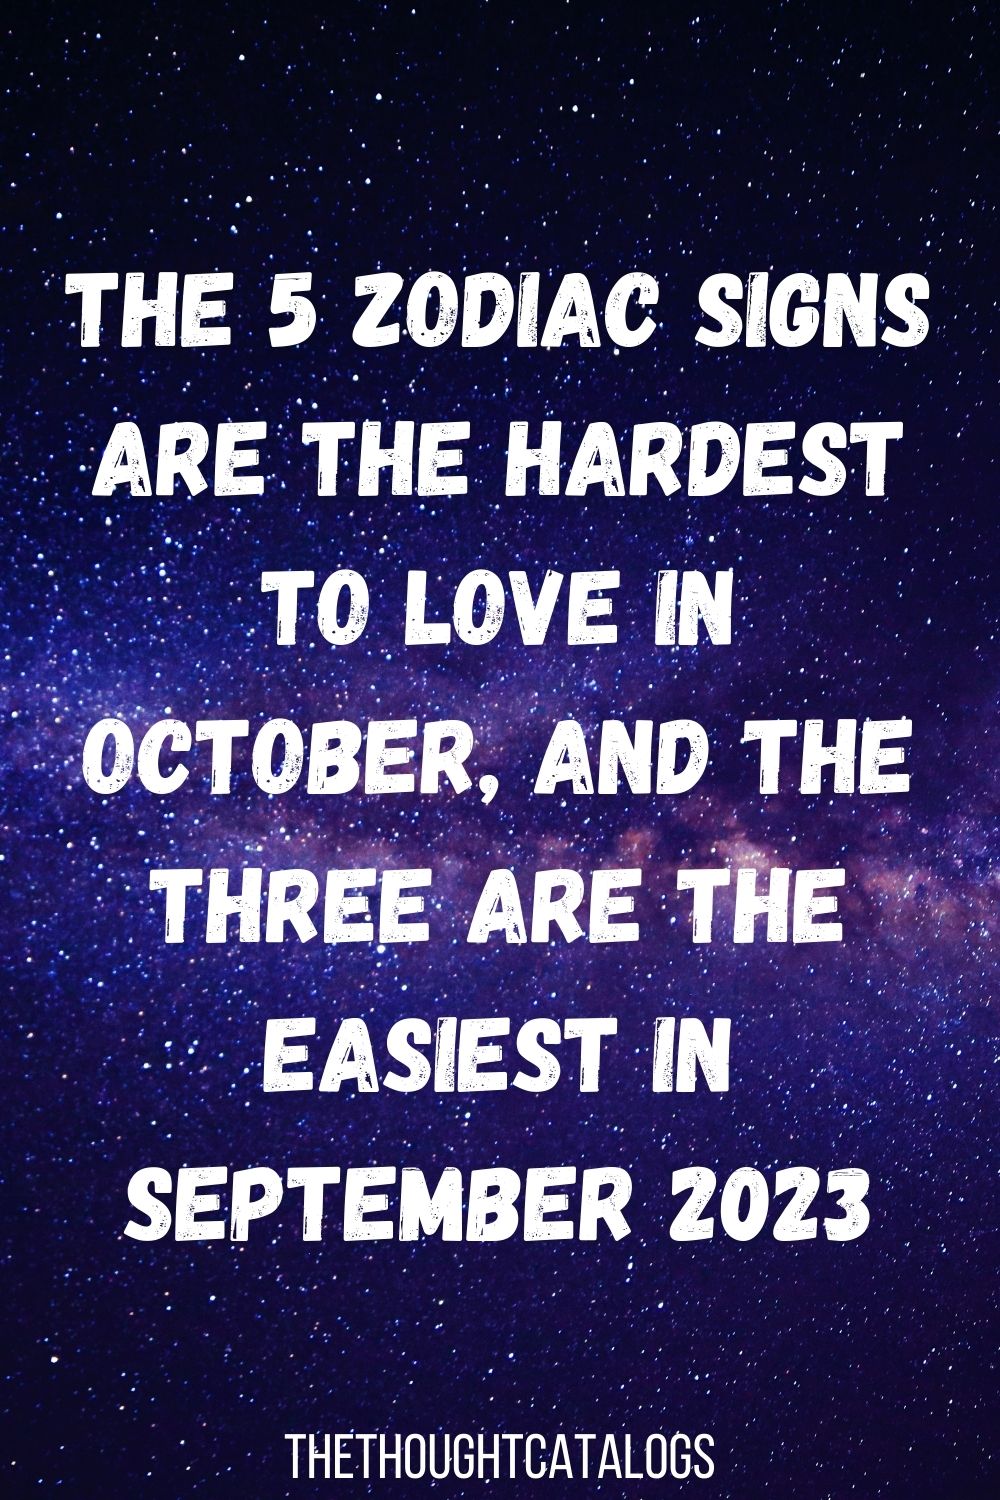 The 5 Zodiac Signs Are The Hardest To Love In October